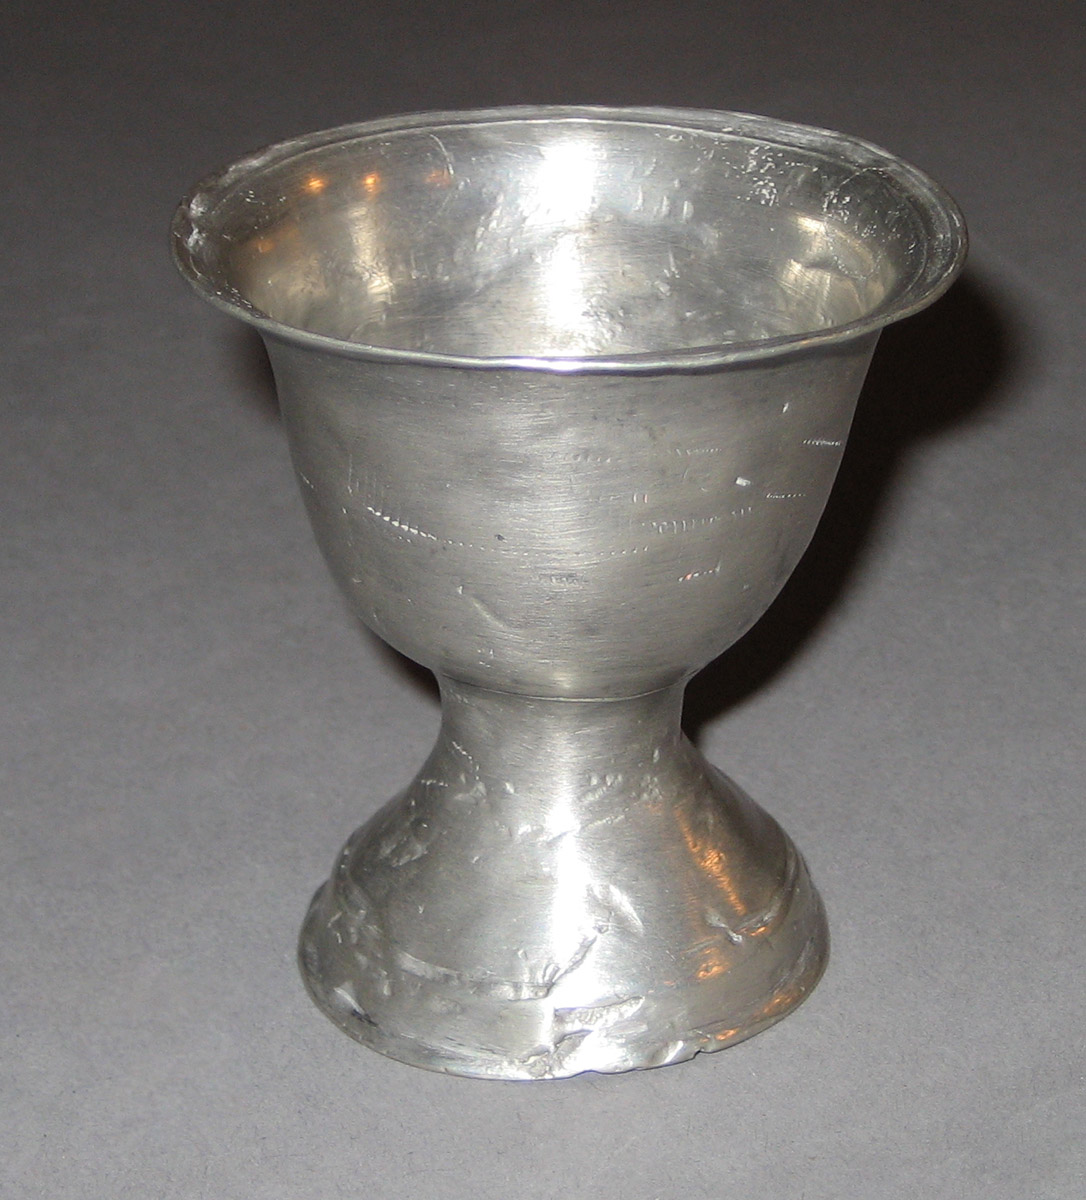 1953.0037.008 Egg cup